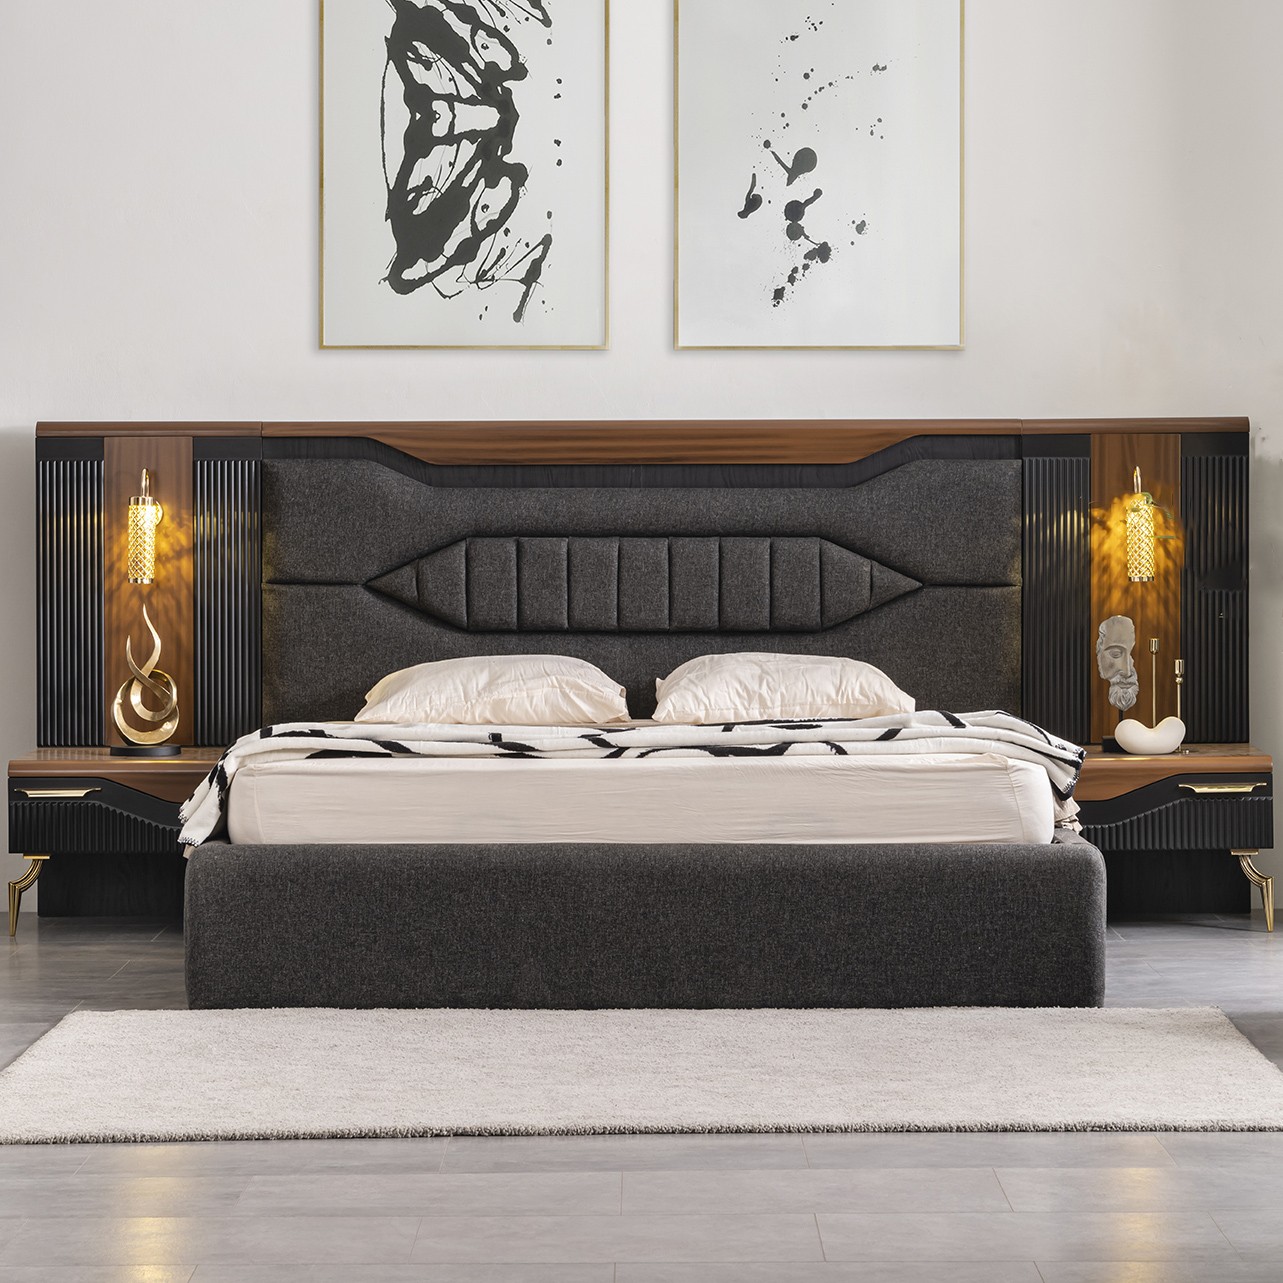 Style Hermes Vol2 Bed Without Storage 160x200 cm